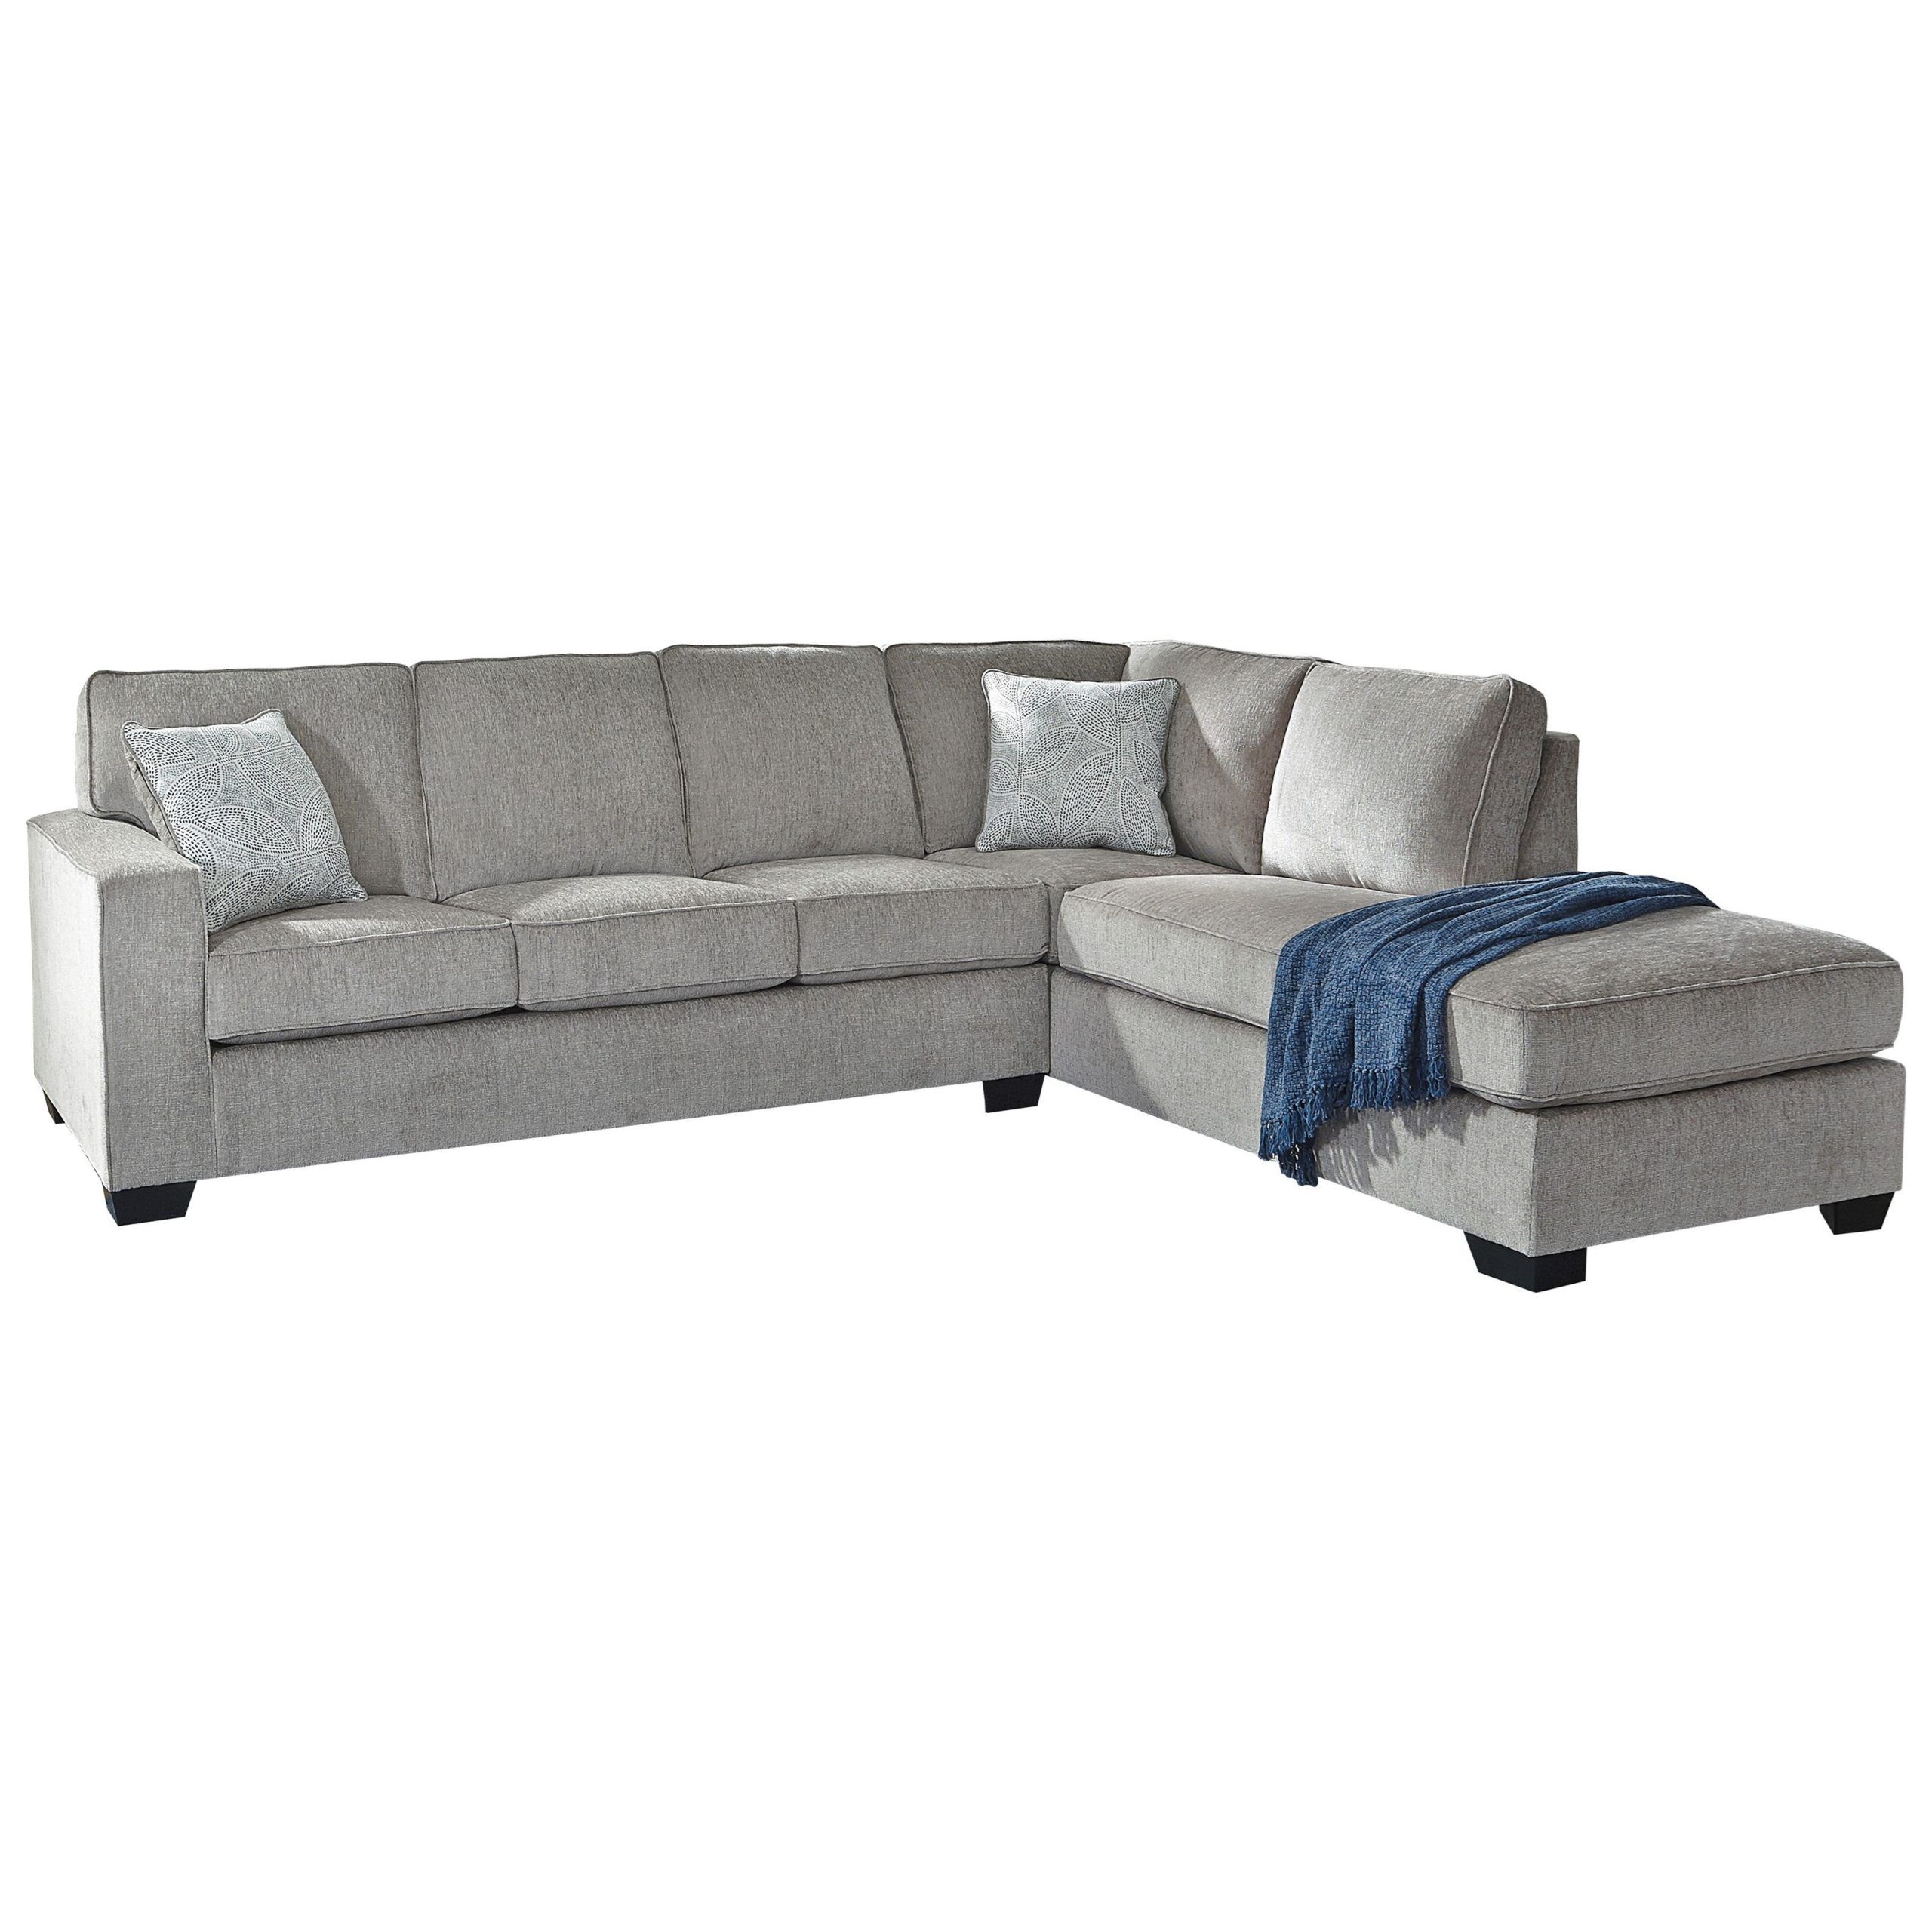 Signature Designashley Altari 123372170 2 Piece Sectional With Inside Left Or Right Facing Sleeper Sectionals (Gallery 18 of 21)